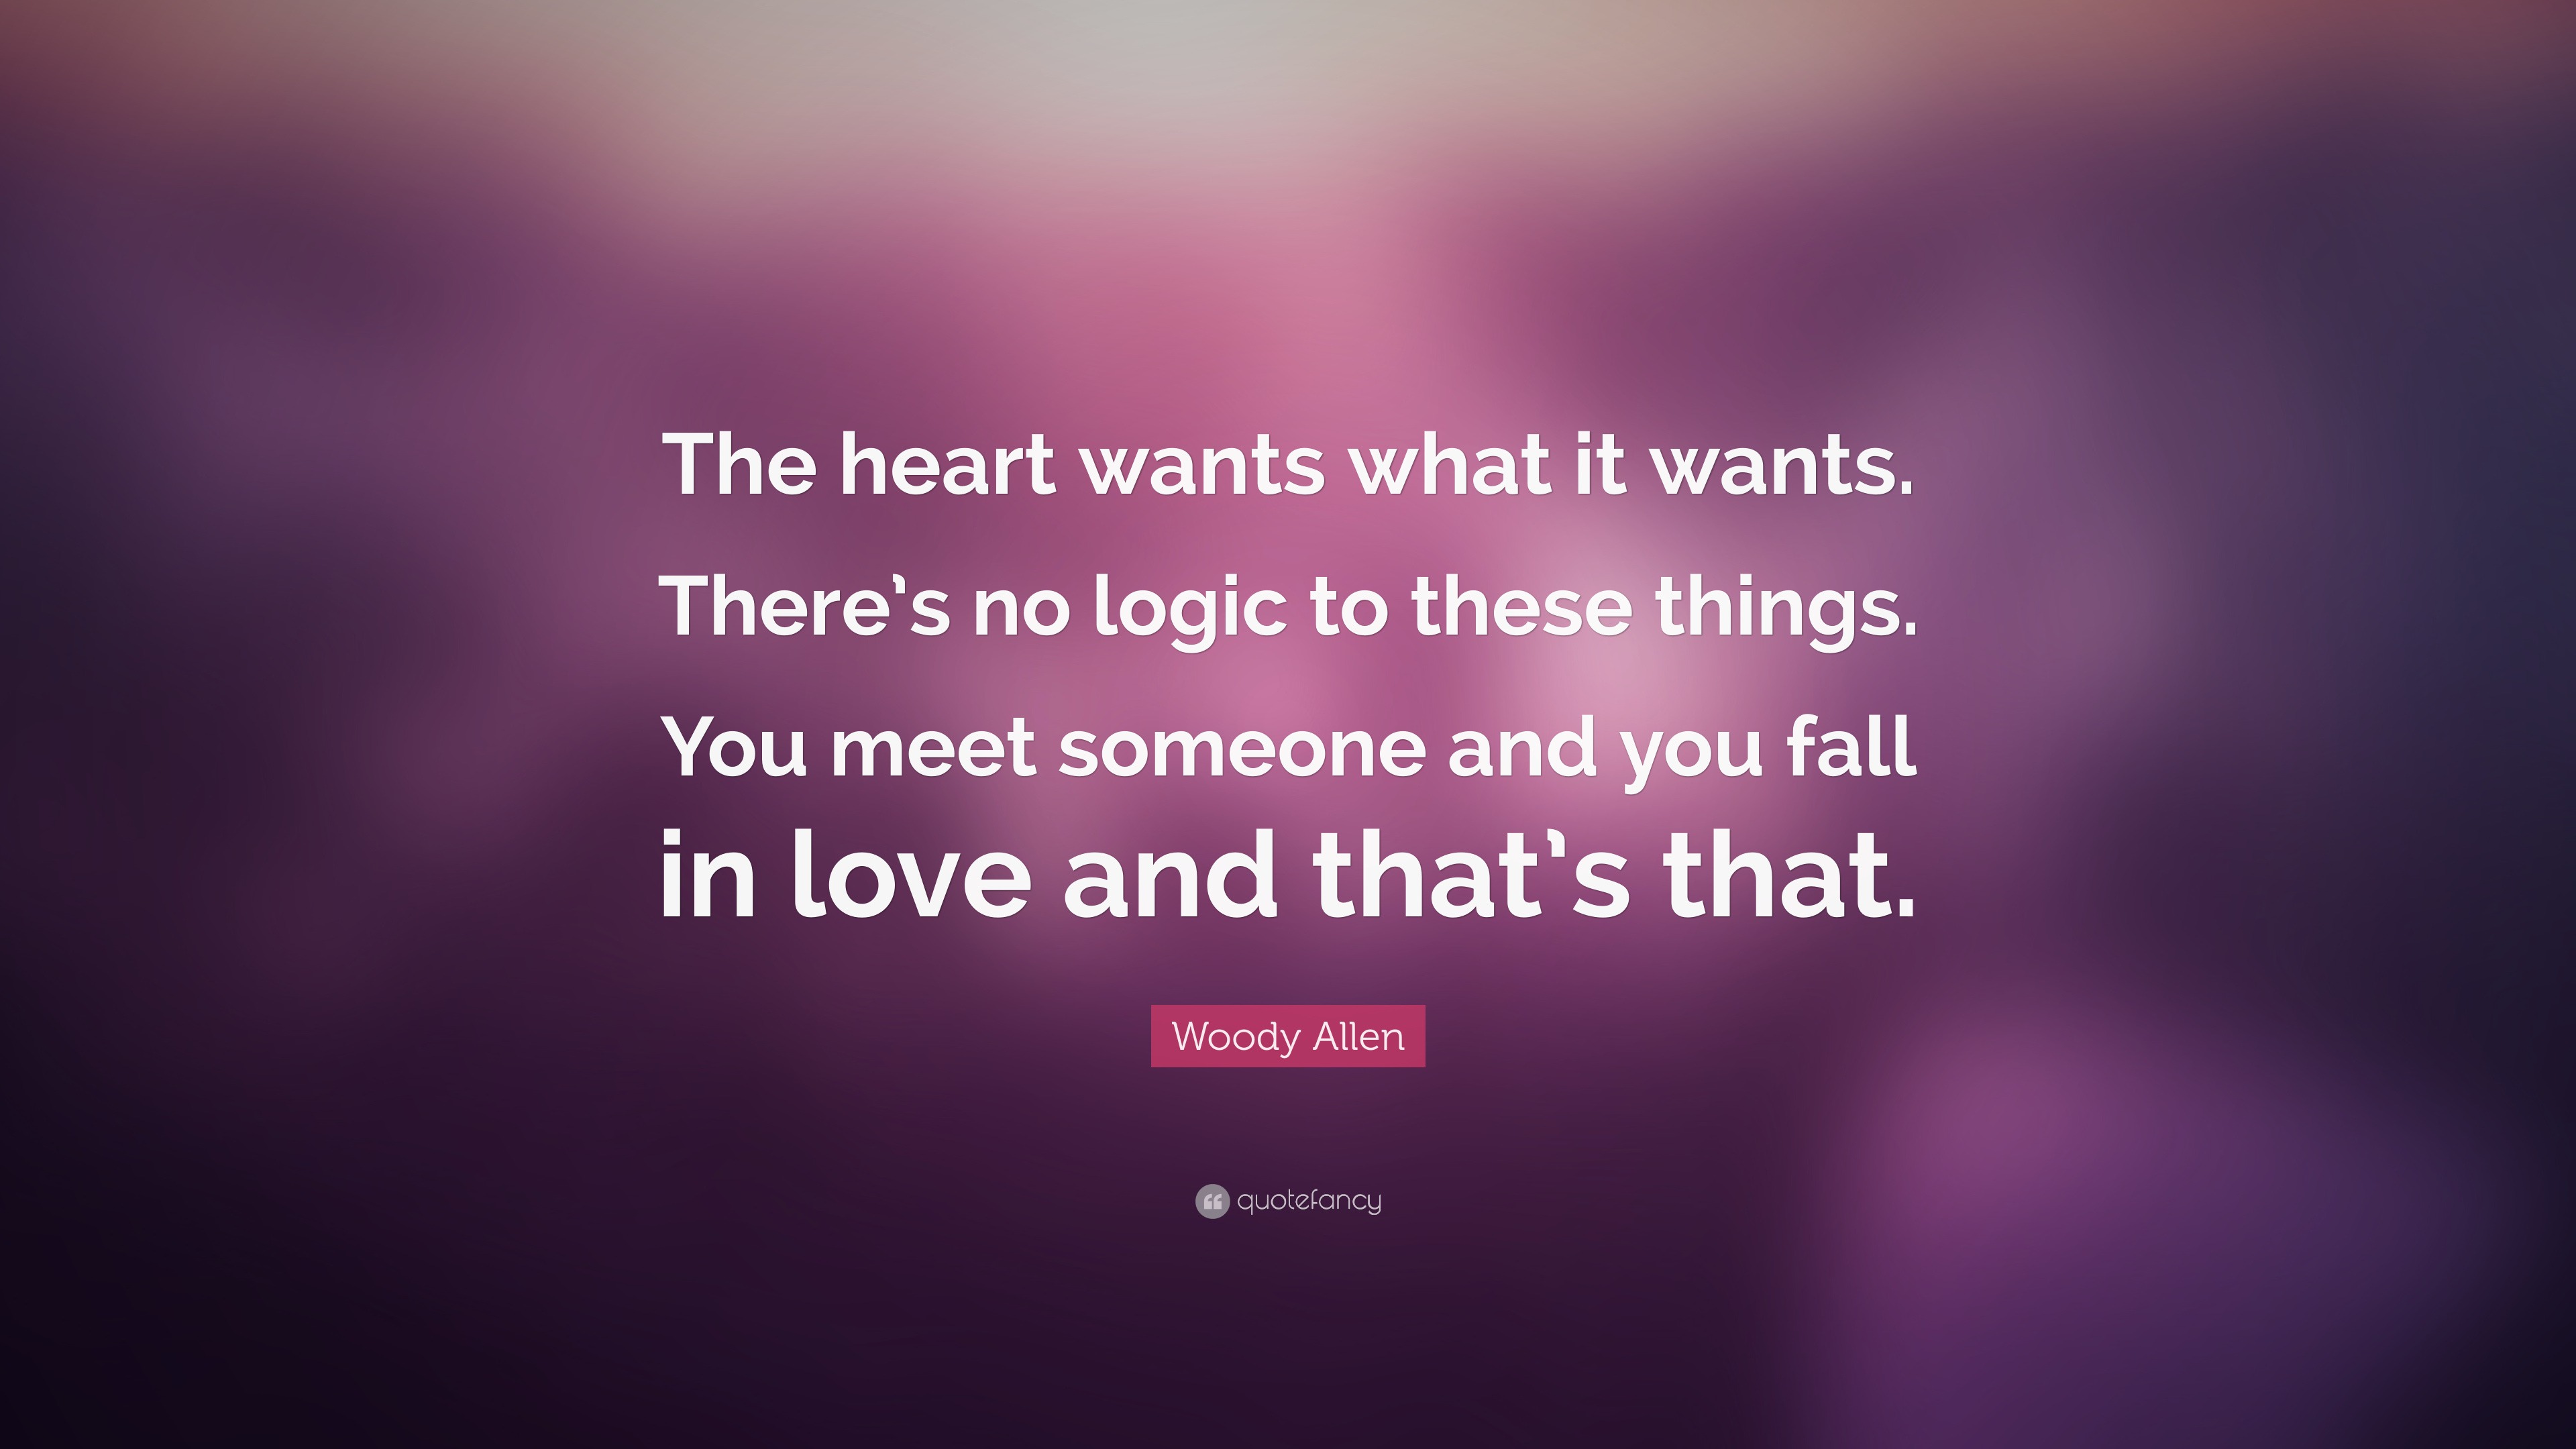 Woody Allen Quote: "The heart wants what it wants. There's no logic to these things. You meet ...